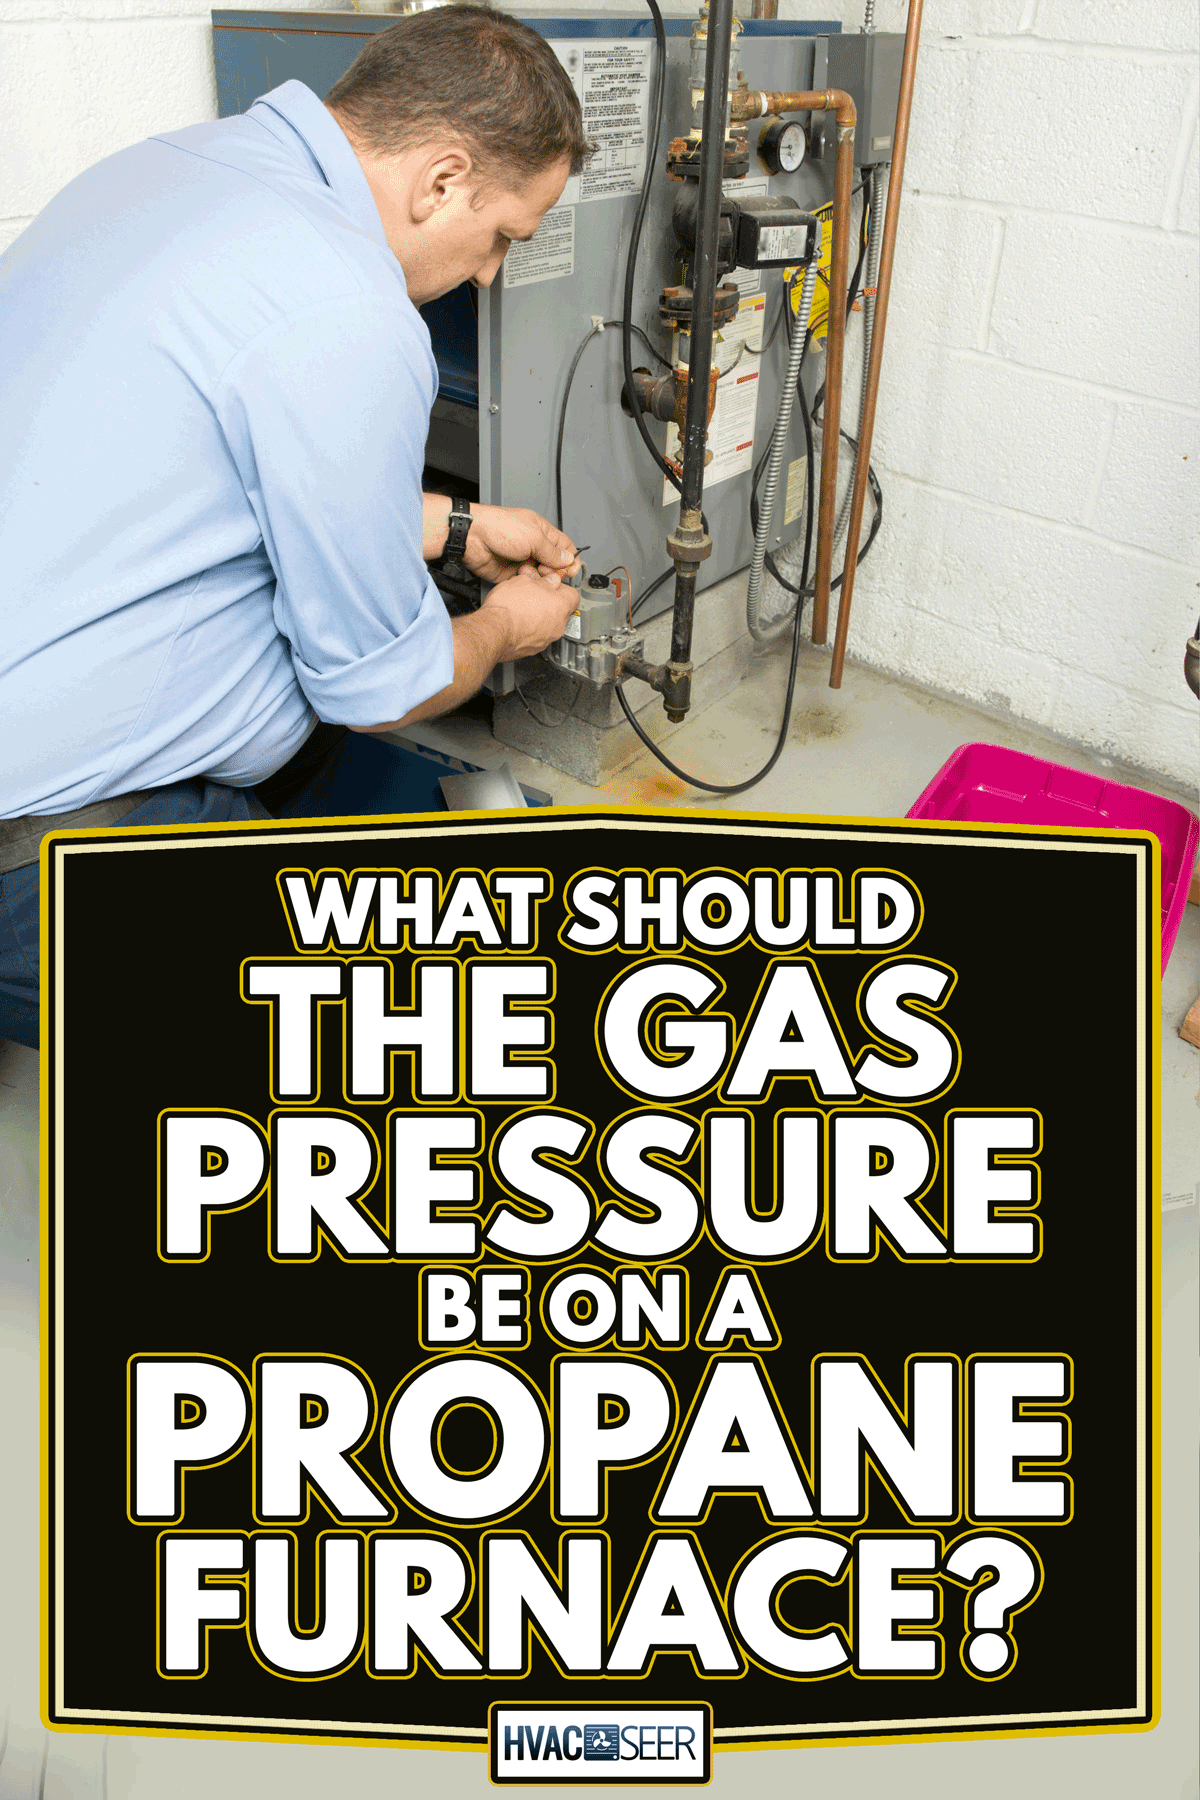 Plumber fixing gas furnace, What Should The Gas Pressure Be On A Propane Furnace?